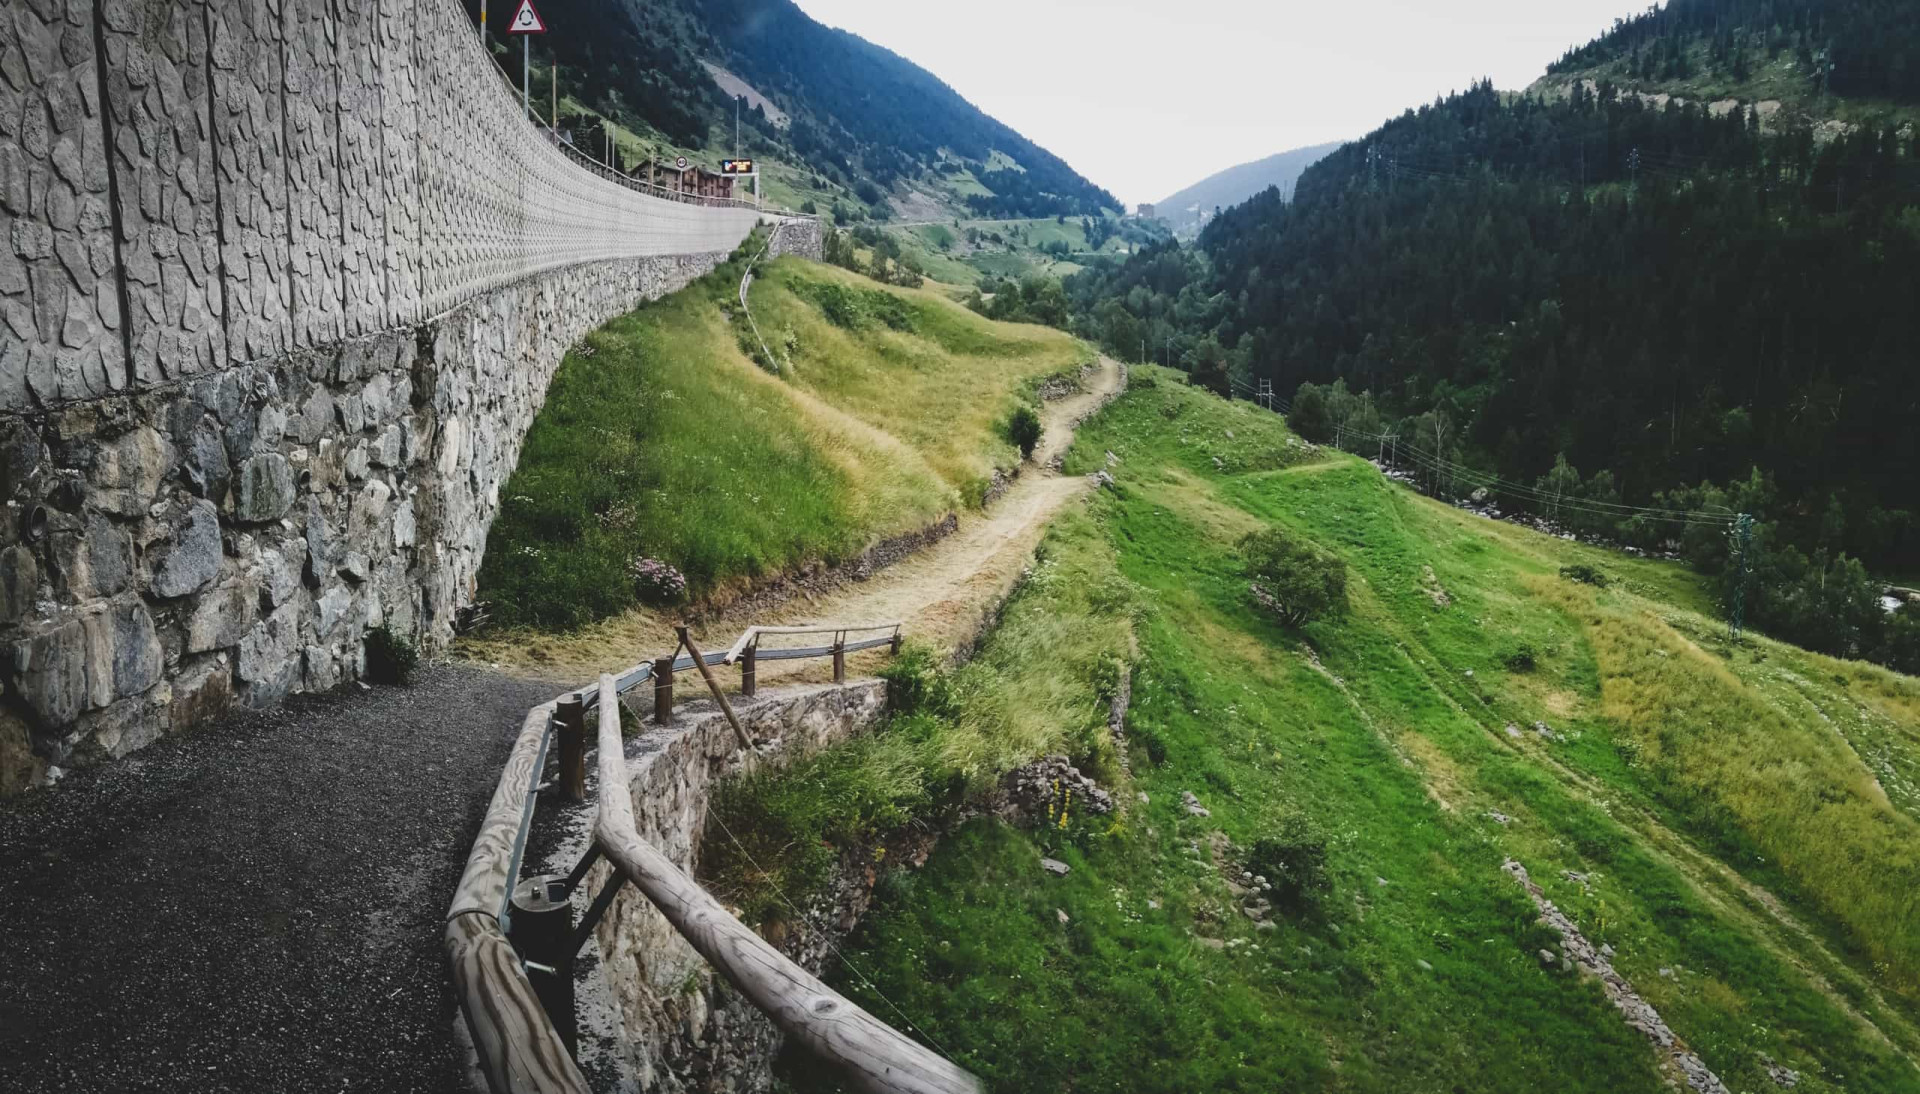 <p>Running through the center of Andorra is the Gran Valira river, the largest river in Andorra. Walking through the many trails of the Valira d'Orient, through which the Gran Valira runs, grants stunning views of the surrounding mountains and grasslands.</p><p>You may also like:<a href="https://www.starsinsider.com/n/203724?utm_source=msn.com&utm_medium=display&utm_campaign=referral_description&utm_content=597567en-za"> This huge crack in Kenya could split Africa in two</a></p>